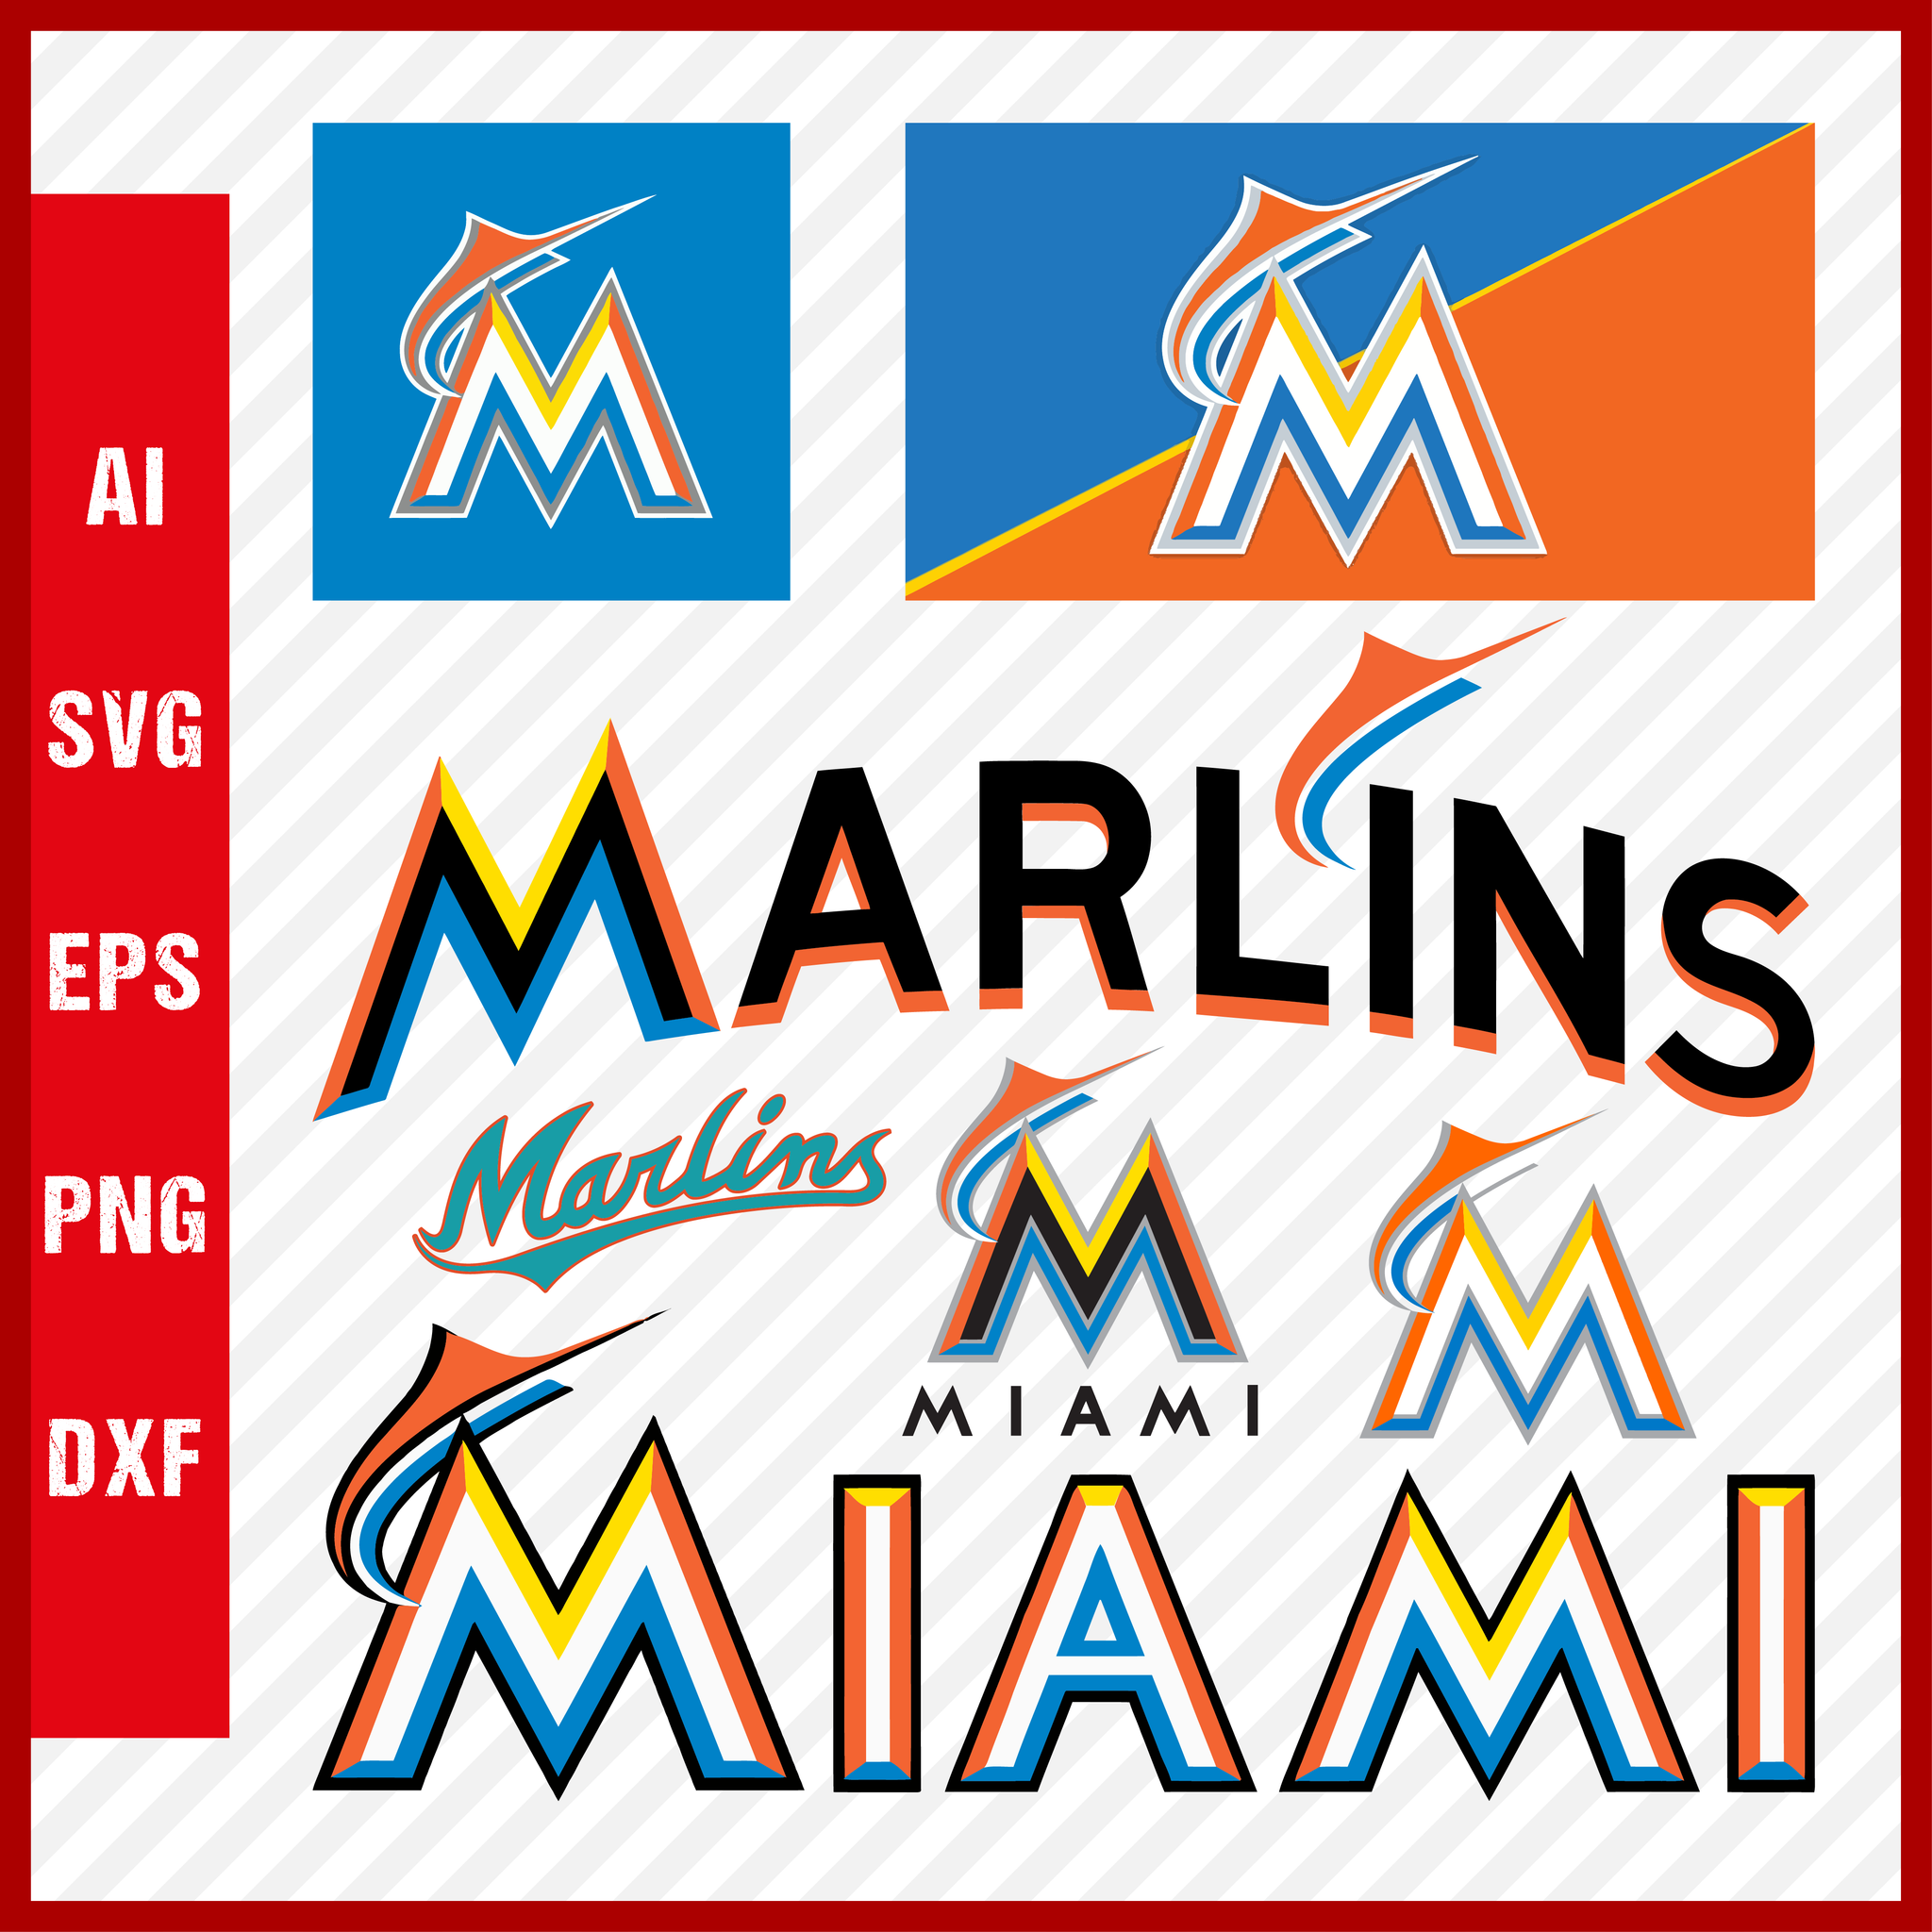 Miami Marlins png images